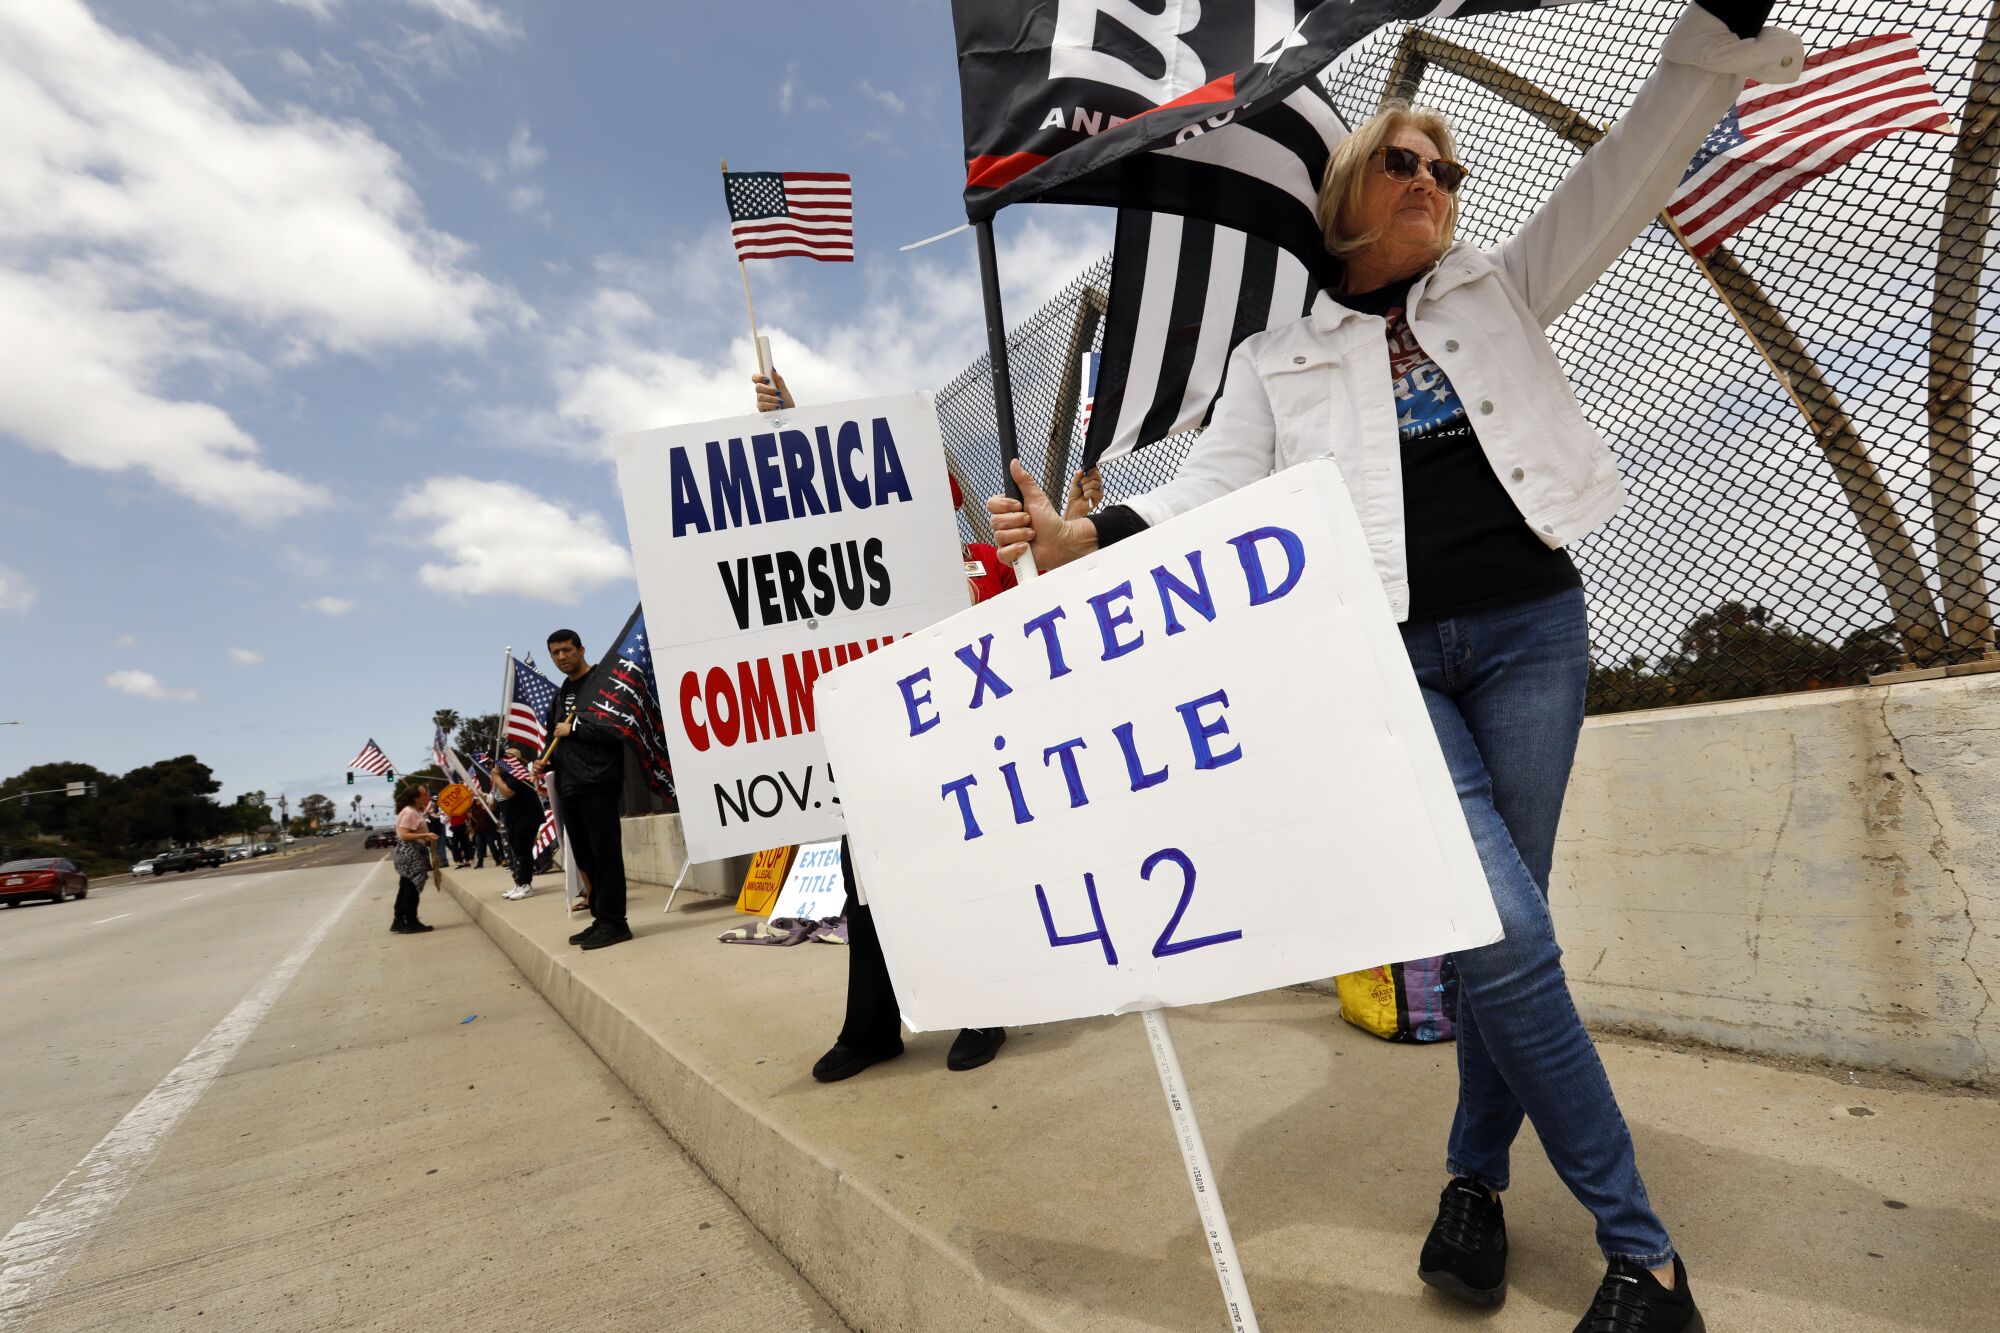 People hold signs supporting the expansion of Section 42 during a rally in Chula Vista, California.